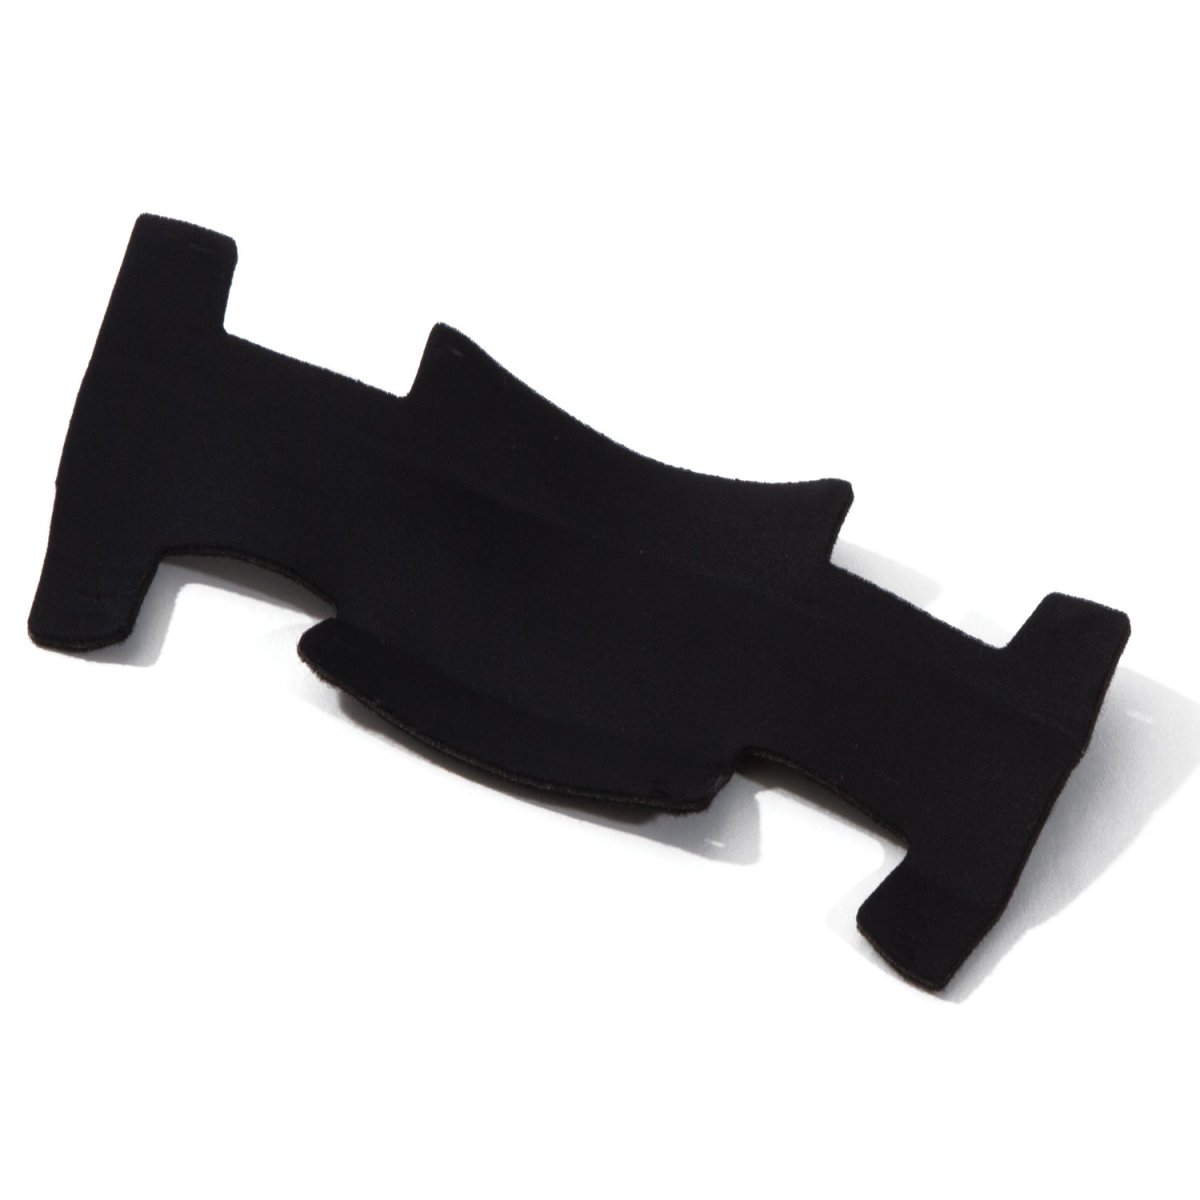 RPB Head Band Brow Pad for T-Link, Z-Link, Z4 Respirators